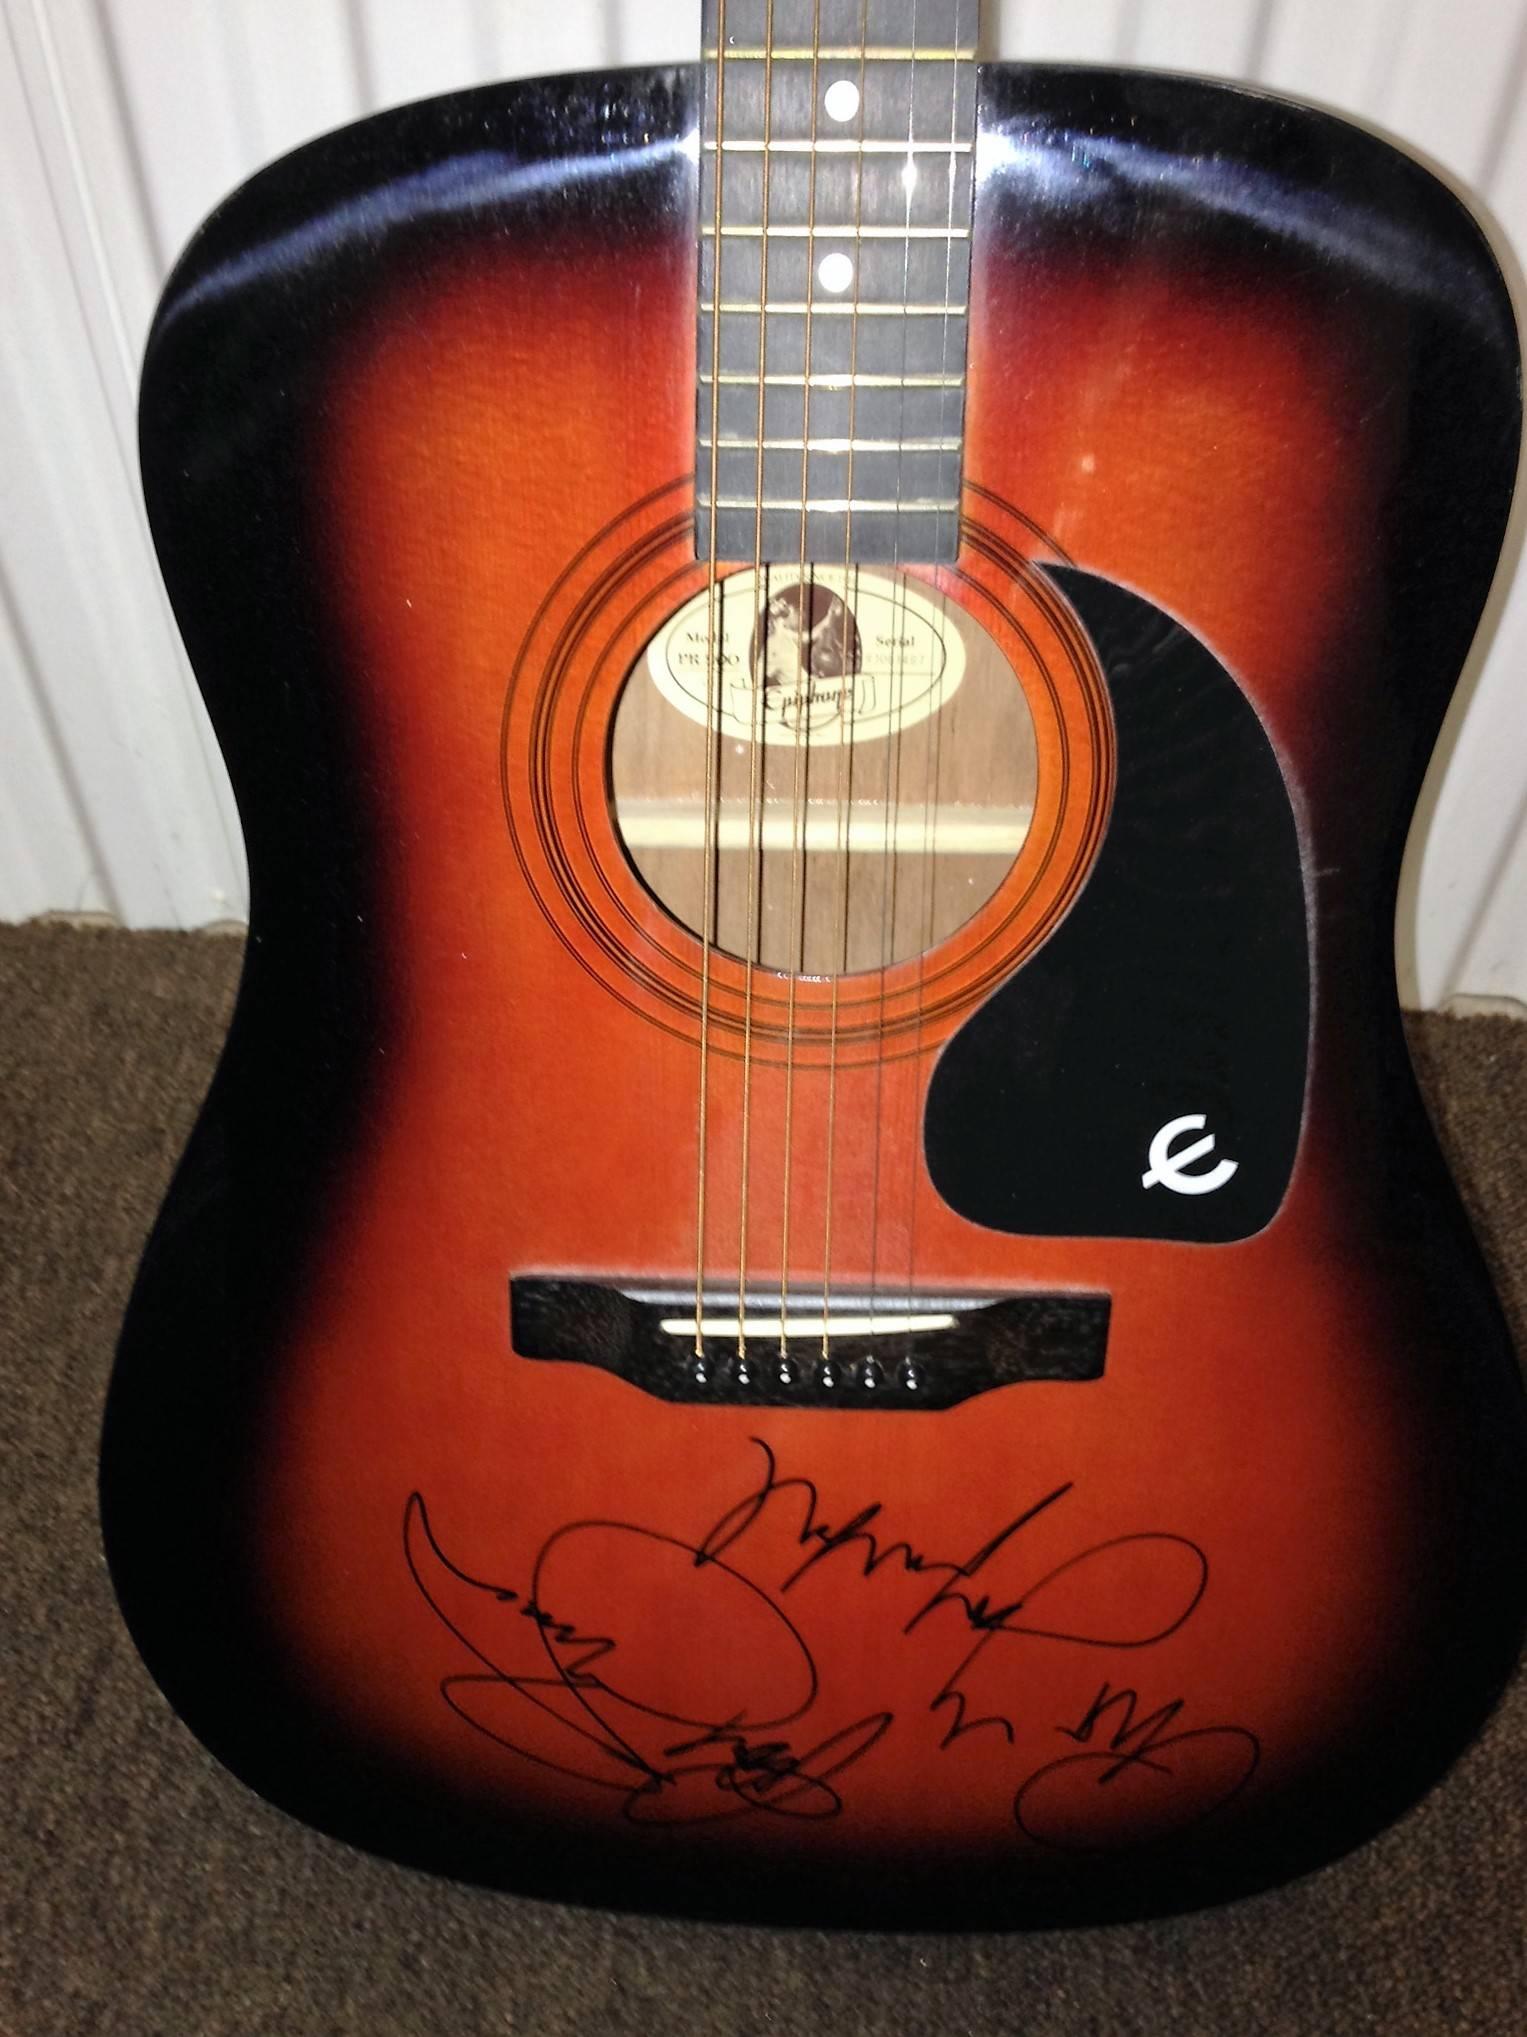 This guitar is signed by Paul Simon and Art Garfunkel in 1994, obtained in person by the seller directly from the Artists. This is a Gibson Epiphone sunburst guitar, made in Korea. This guitar and the autographs are in excellent condition.